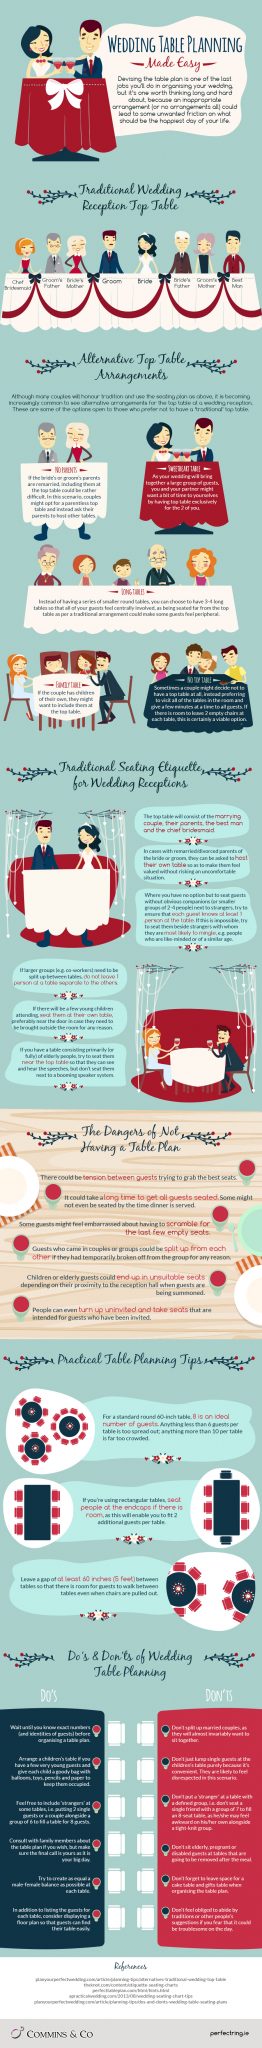 Your Wedding Table Seating Plan Made Easy Infographic Destination